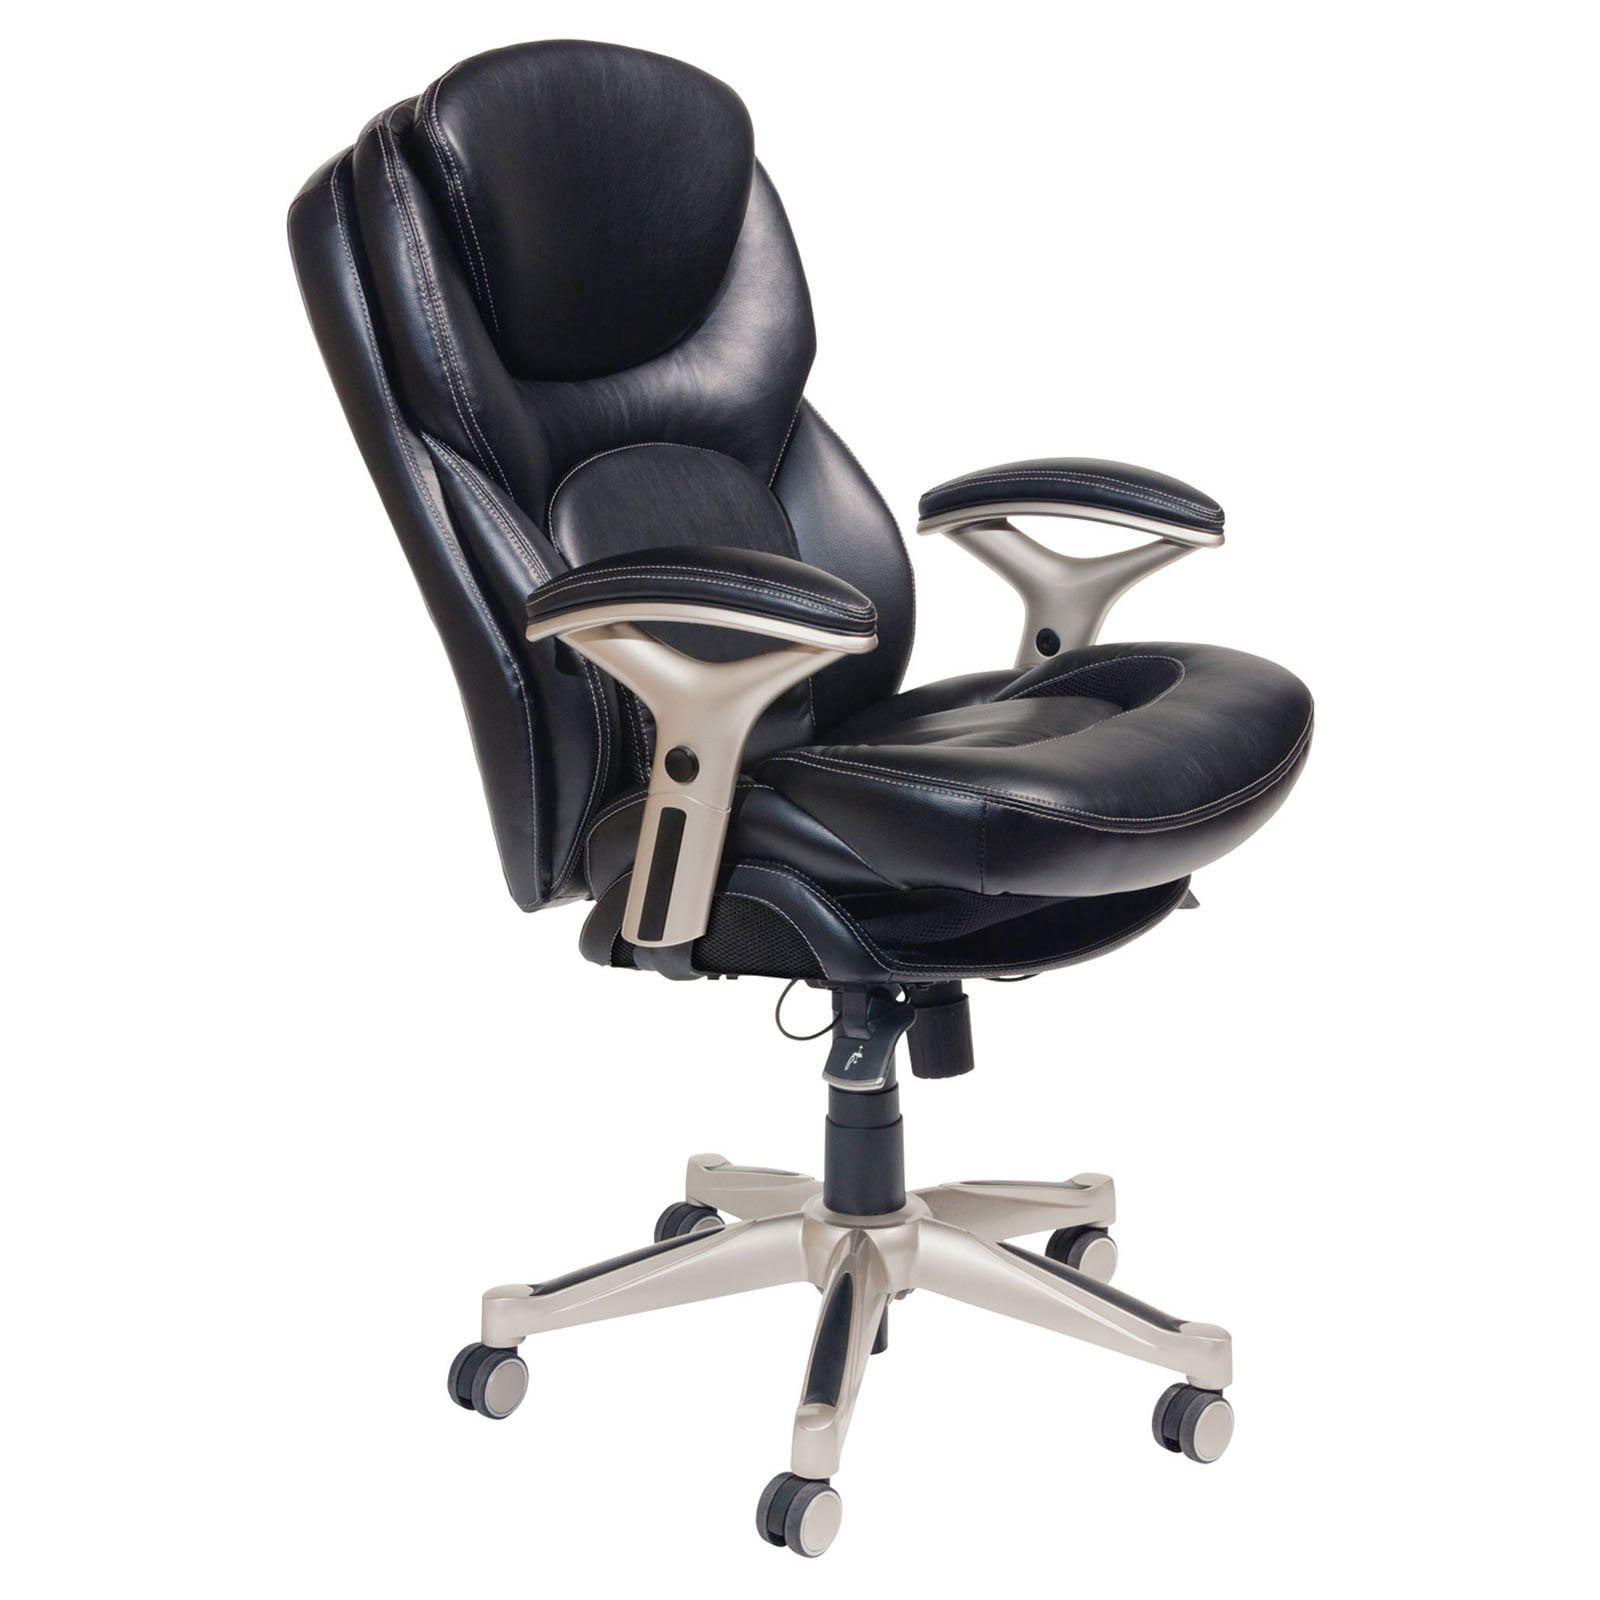 Serta Back In Motion Health And Wellness Mid Back Bonded Leather